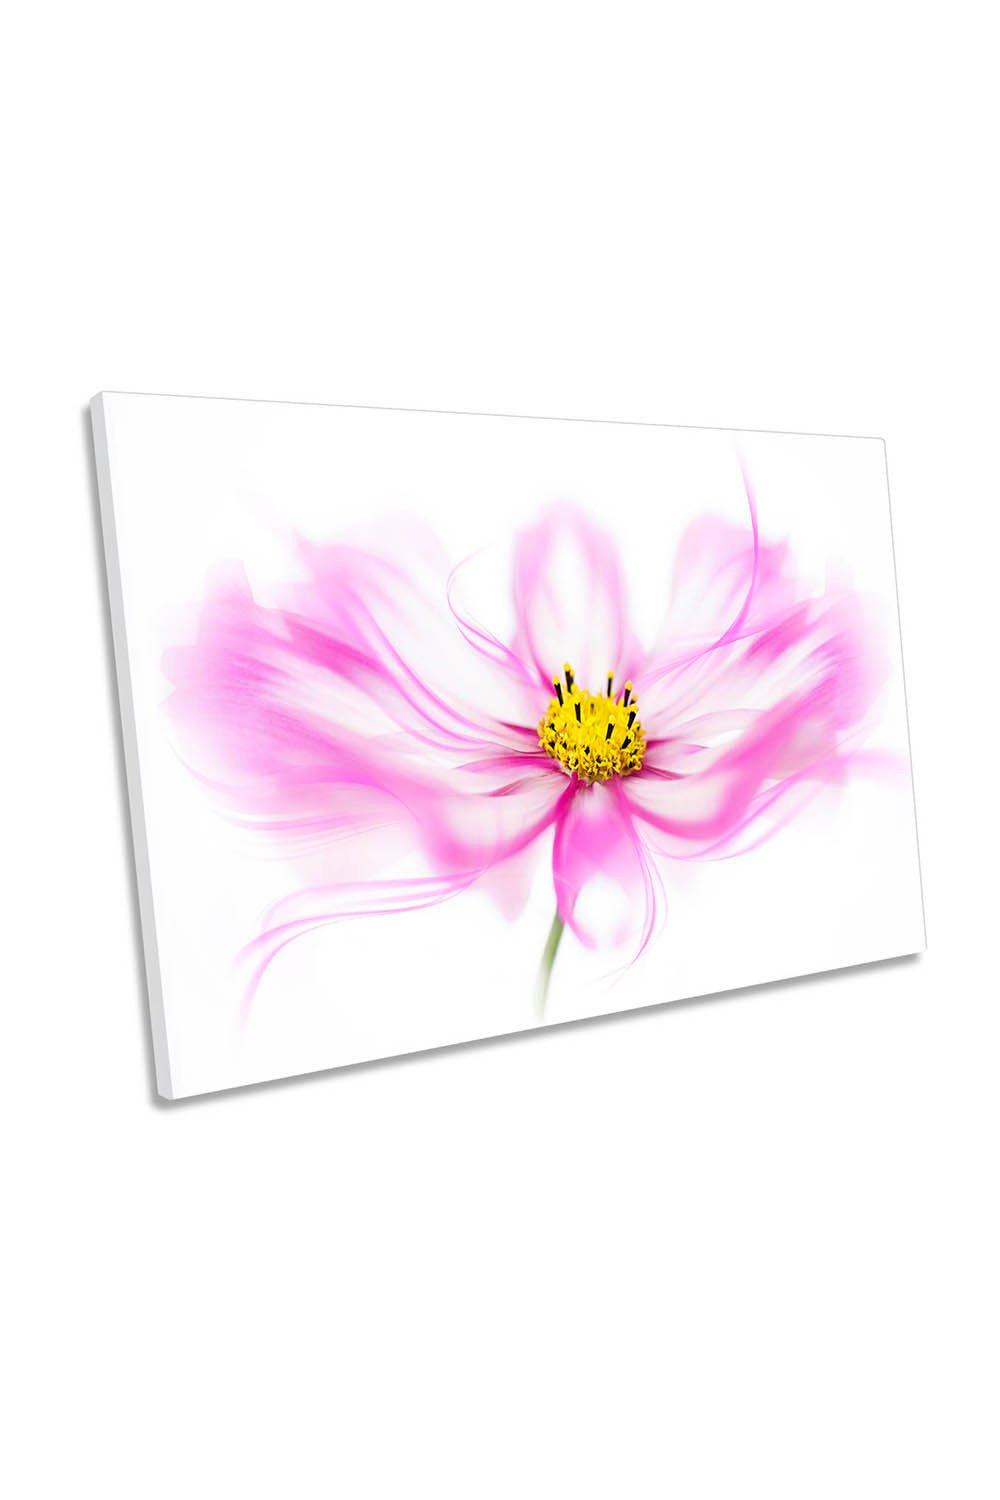 Summer Breeze Pink Floral Flower Canvas Wall Art Picture Print